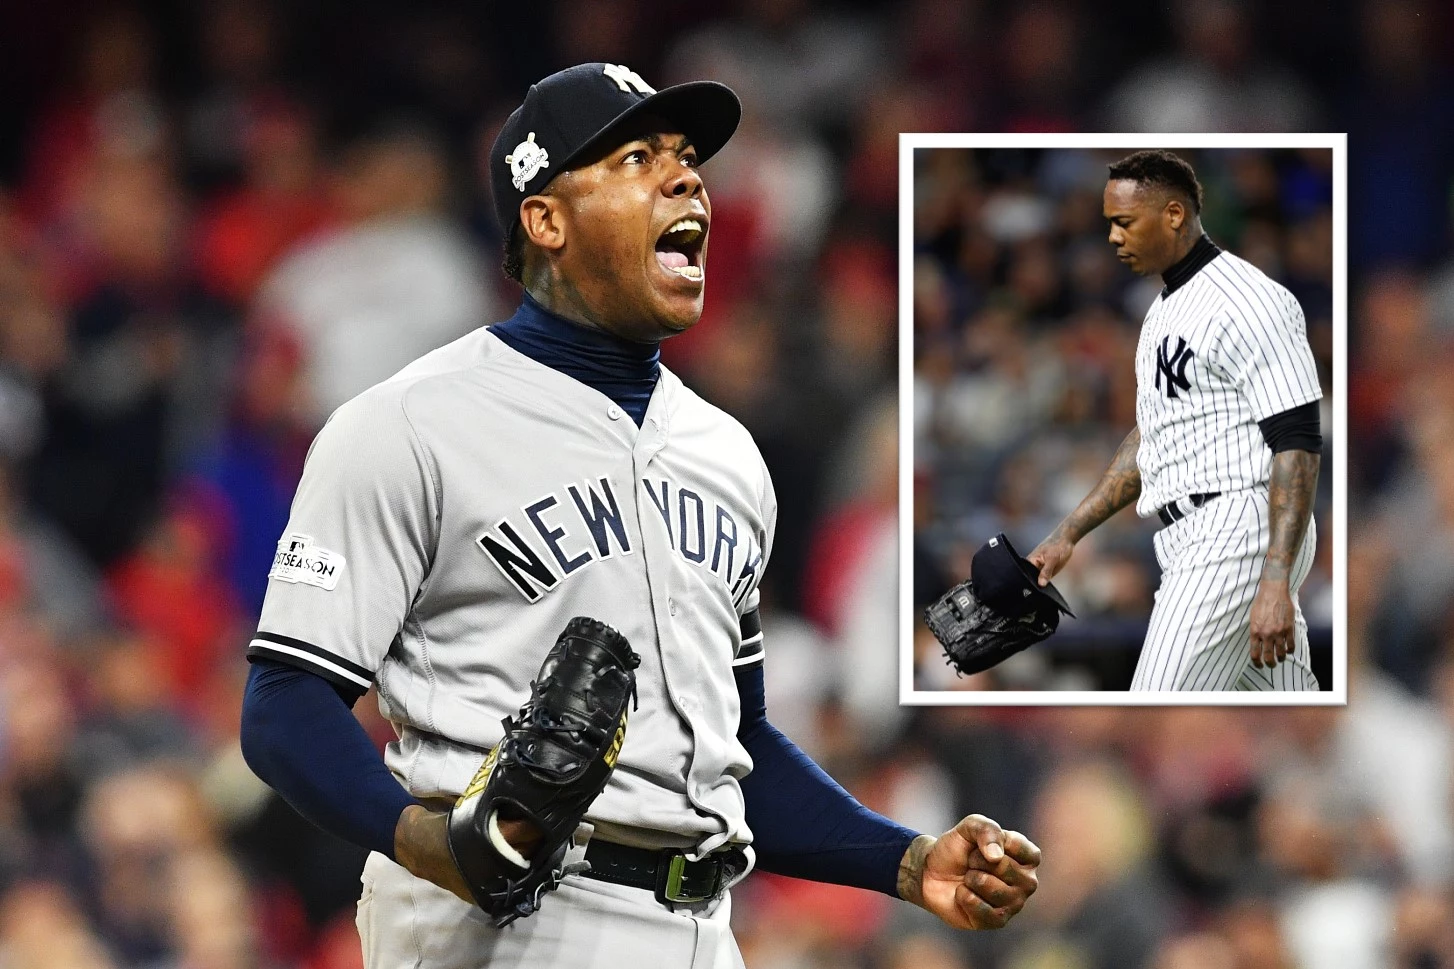 Aroldis Chapman is determined to help bring the Yankees back to